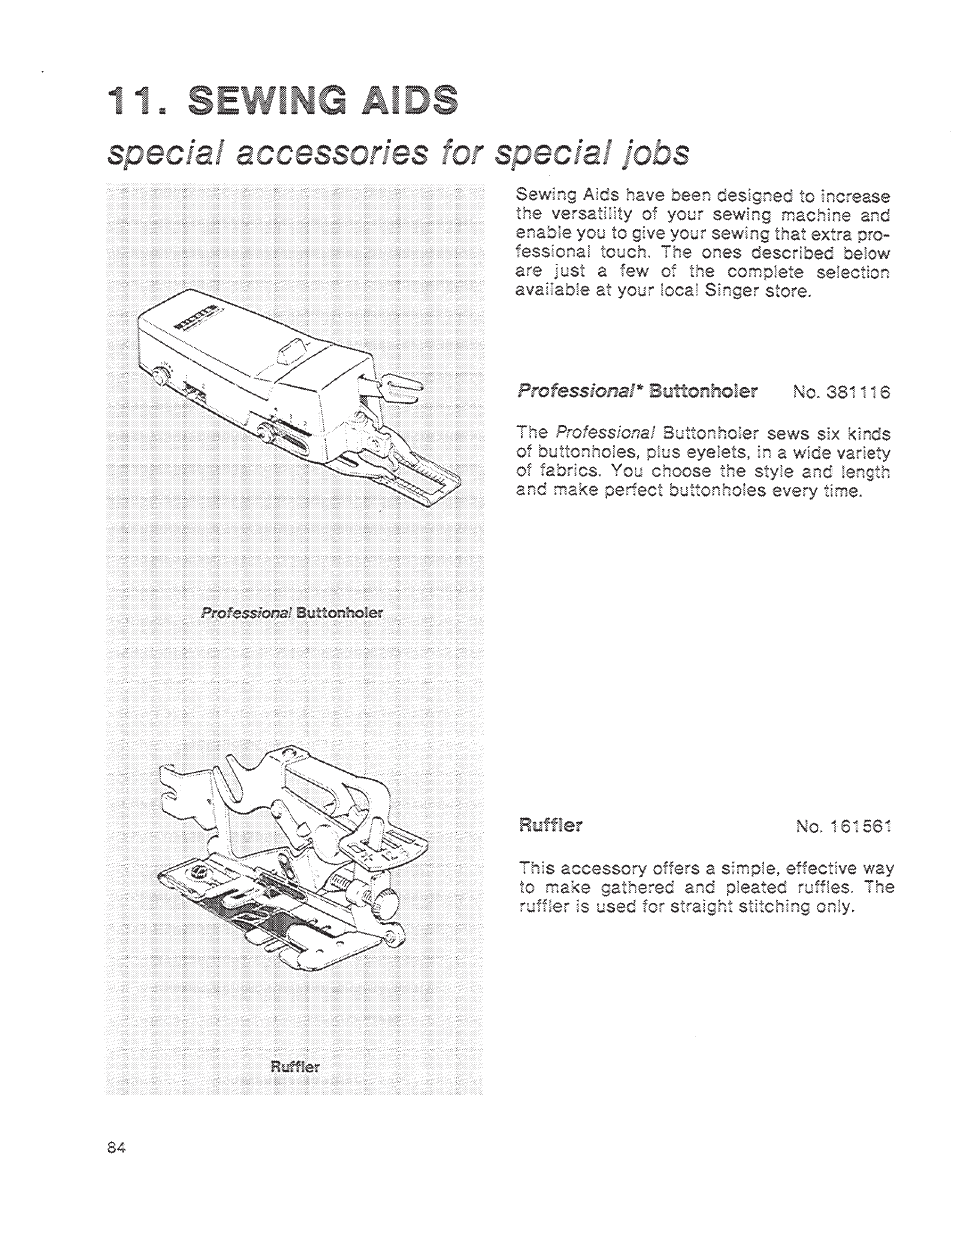 Special accessories for special jobs | SINGER 1200 Athena User Manual | Page 86 / 90